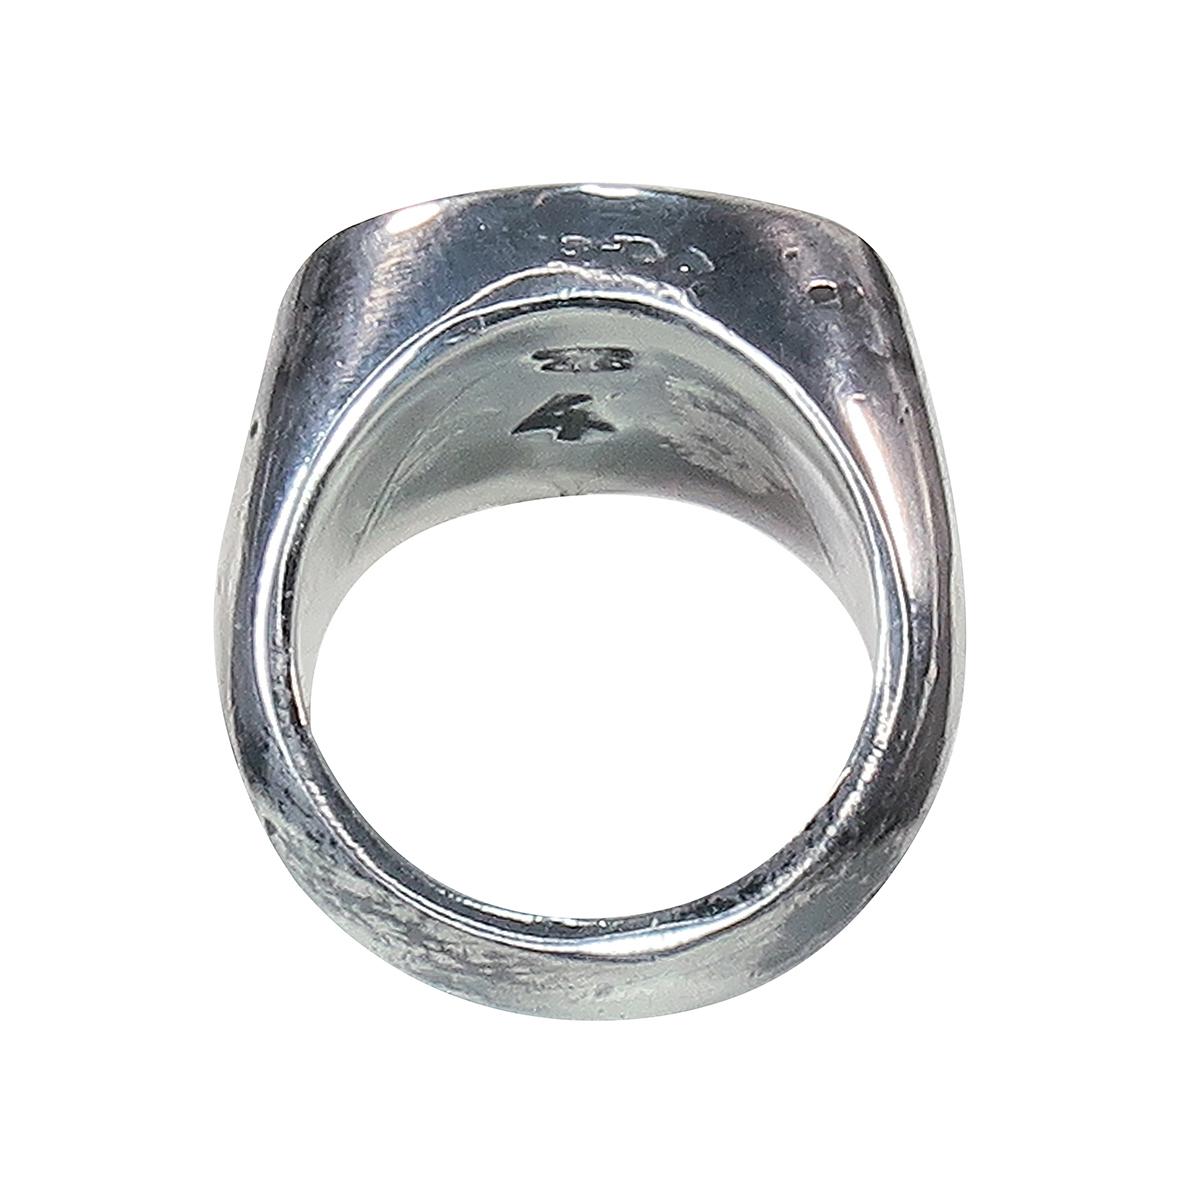 Maison Martin Margiela Silver Signet ring with pre-used effects.
Fall 2003, Line 4 Accessories. 

Kicks & scratches are parts of the design and similar on all 3 sizes. 
Silver hallmark inside under the 